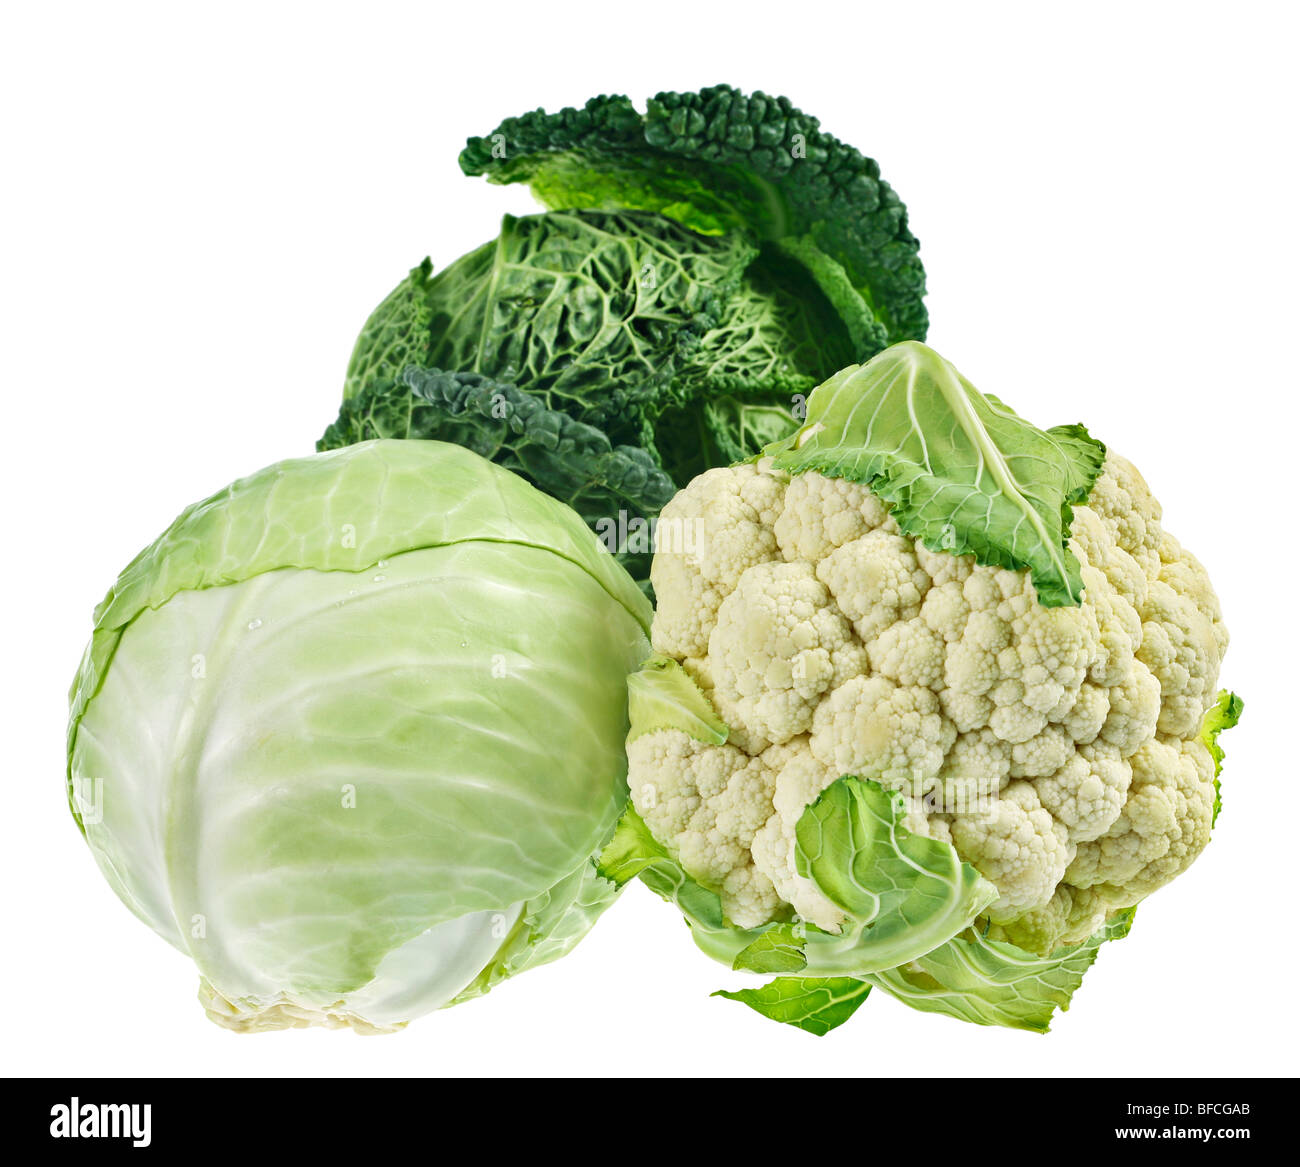 Green cabbage detail on white background Stock Photo